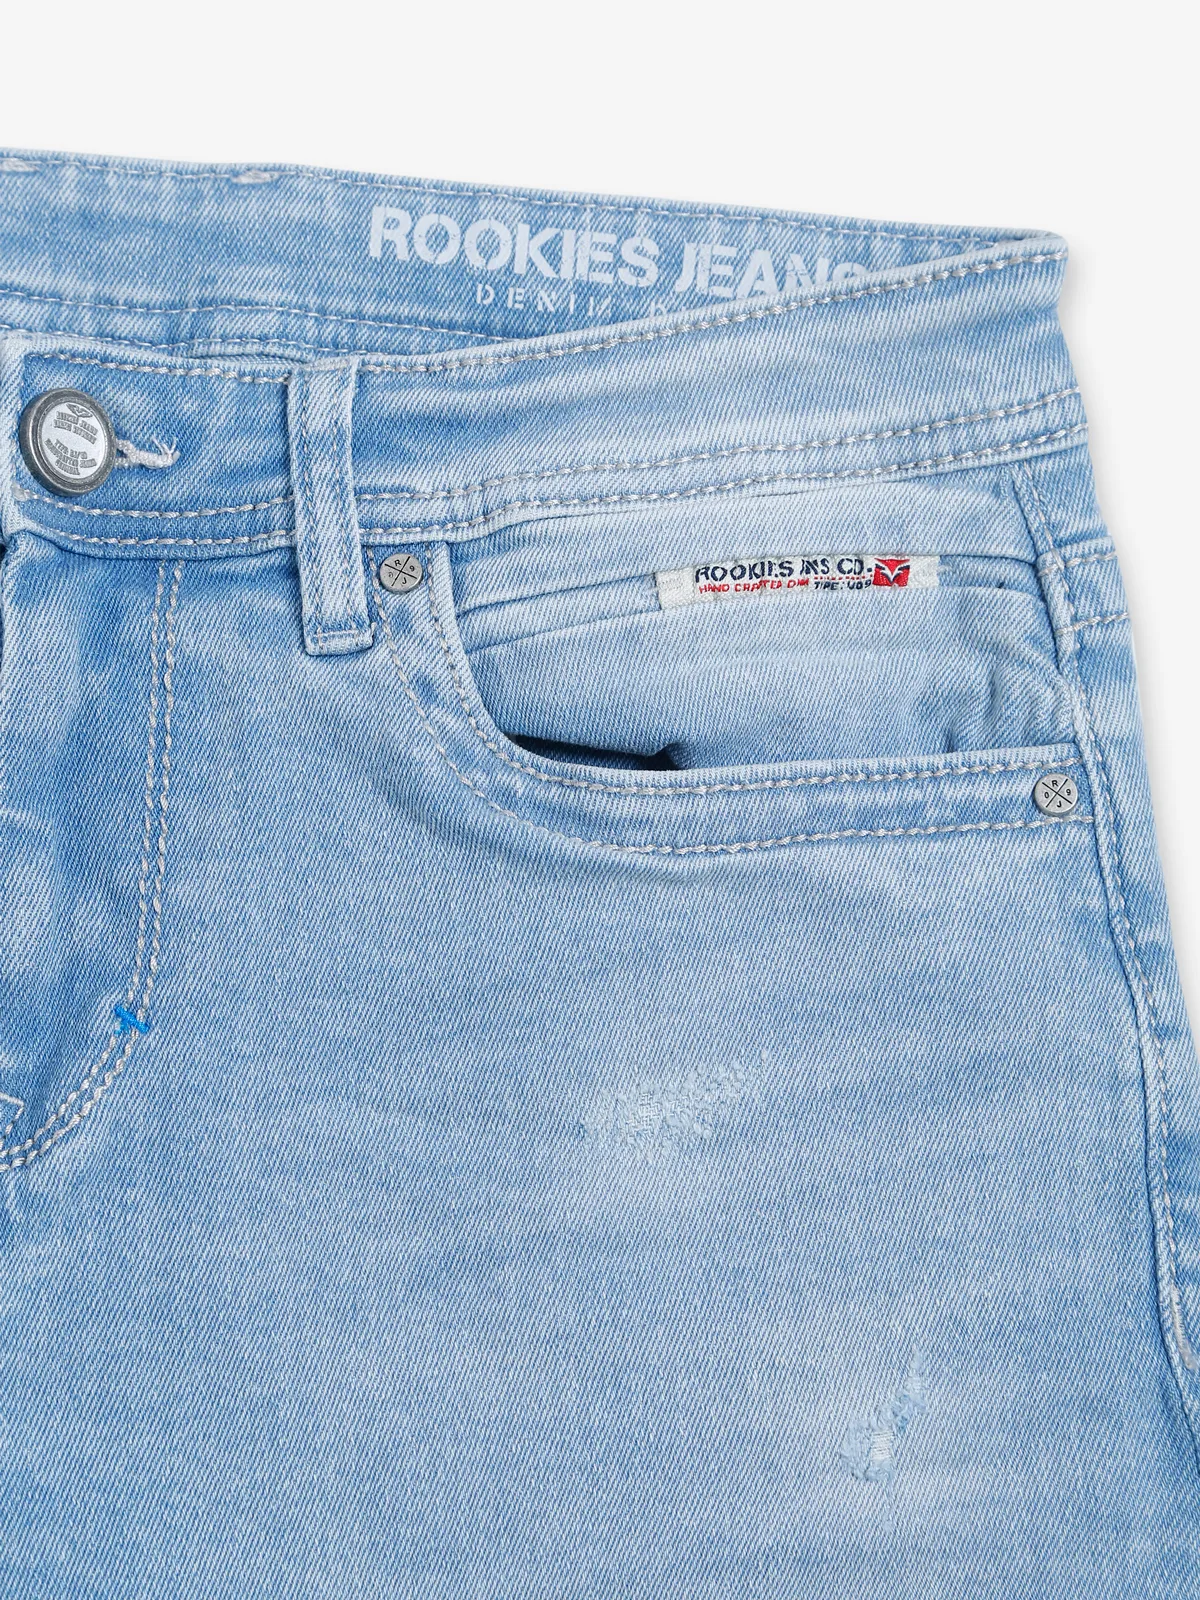 Rookies light blue ripped jeans